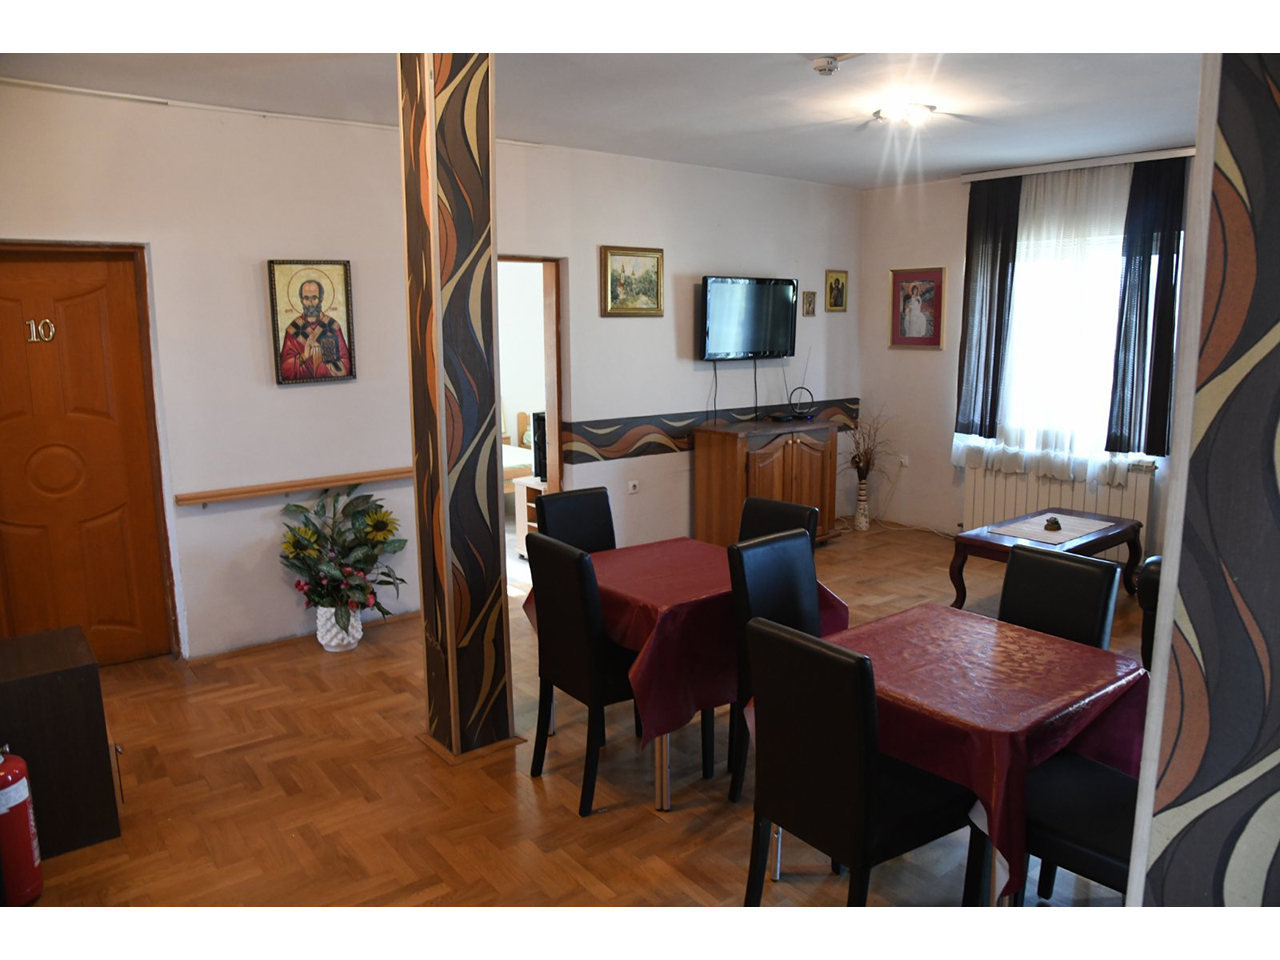 Photo 7 - ALTINA DELUXE Homes and care for the elderly Belgrade